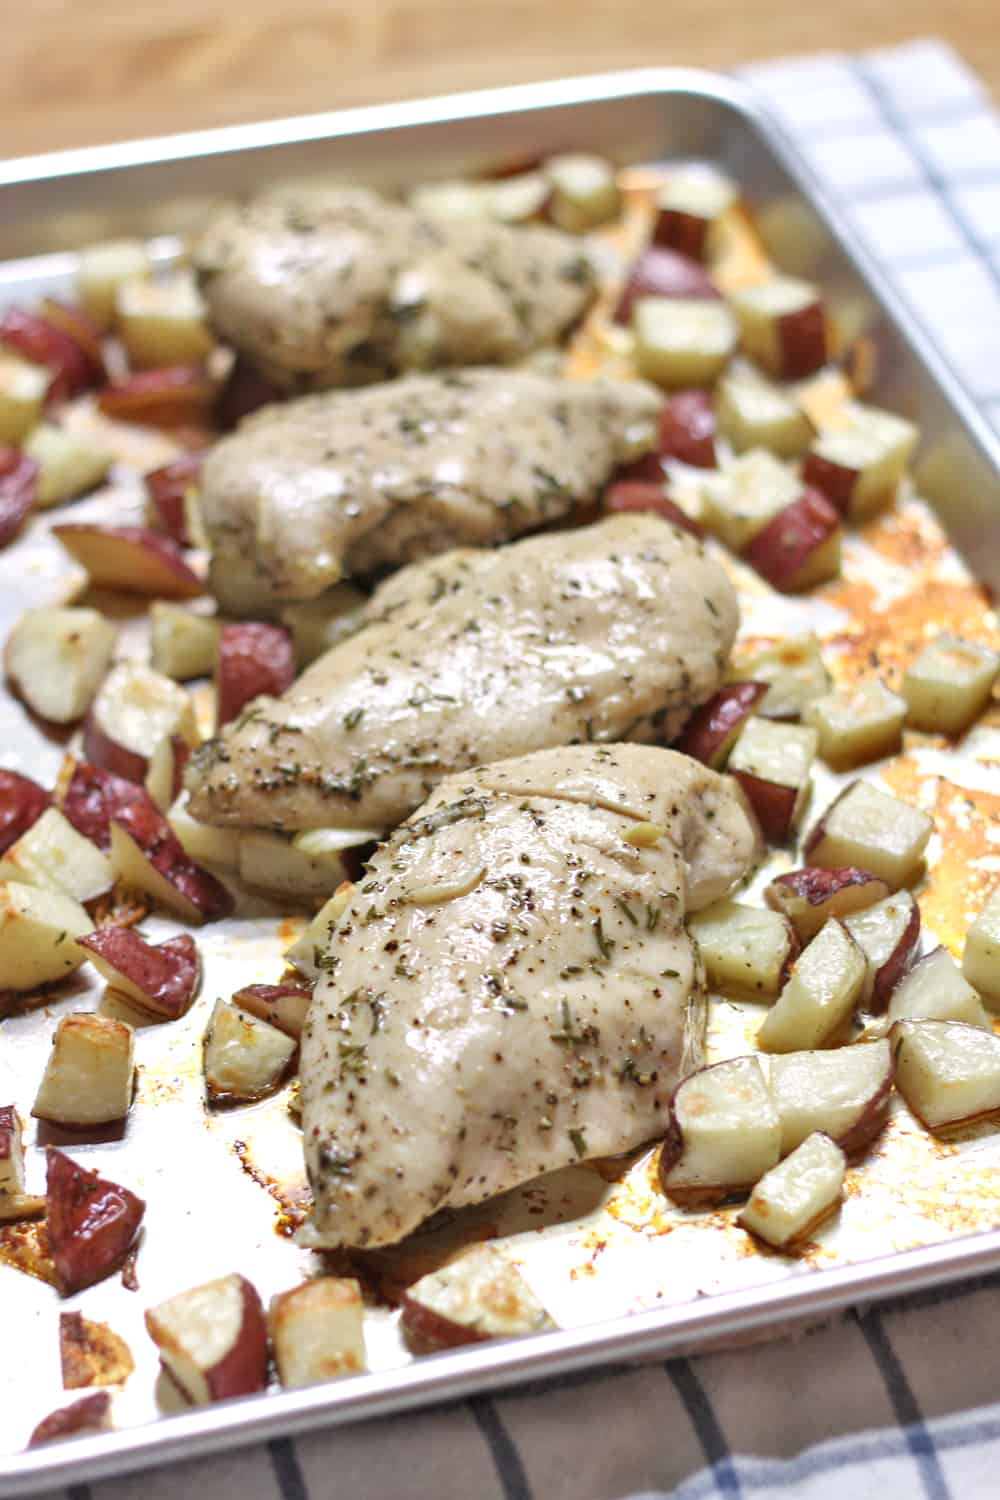 This healthy Whole30 and Paleo friendly rosemary and garlic roast chicken and potatoes dinner is SO easy, SO tasty, and uses only FOUR ingredients!